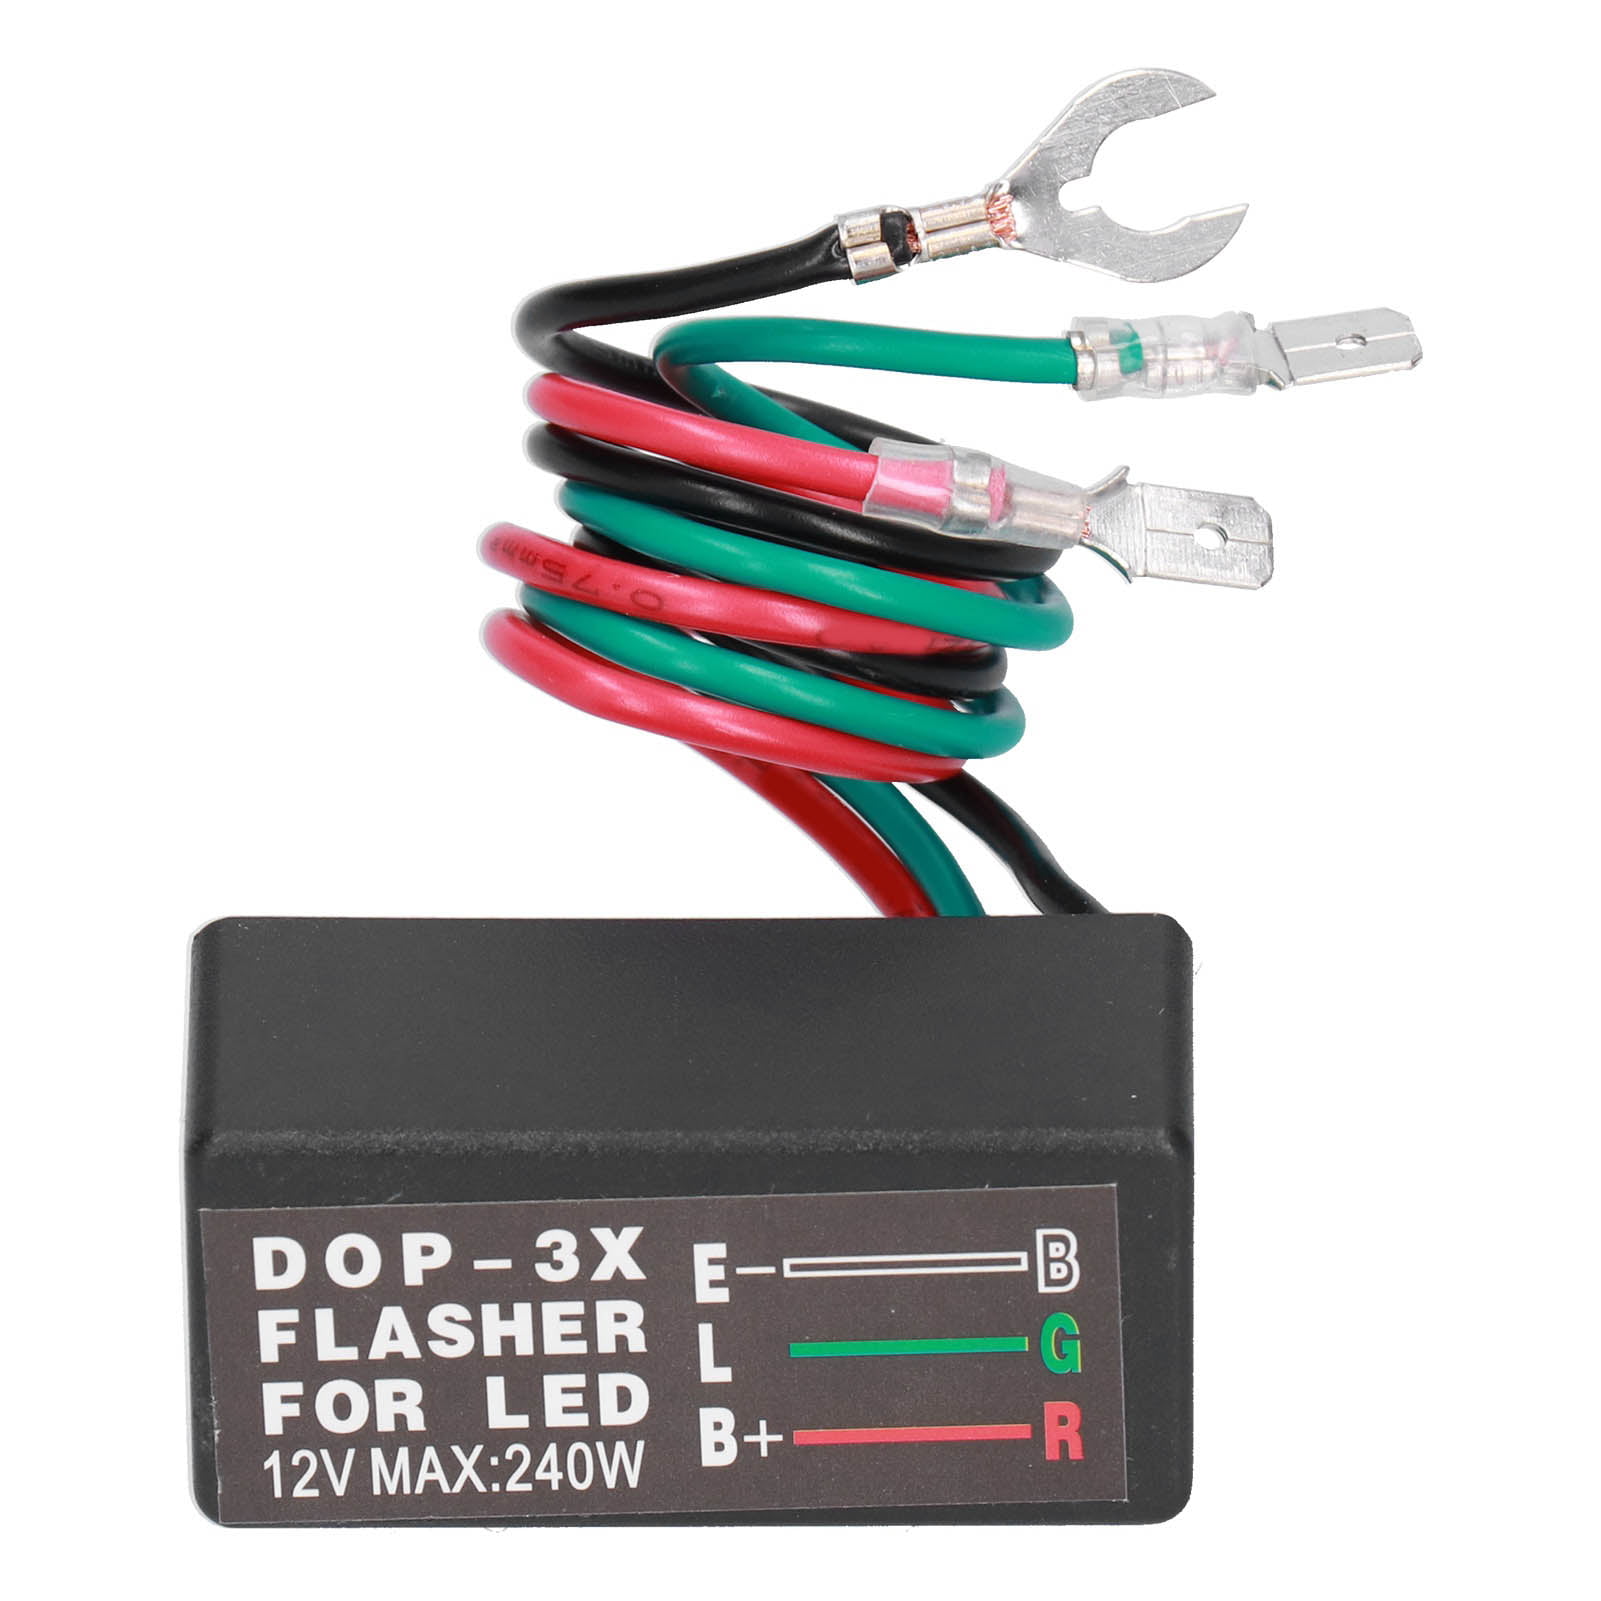 Youthink Flash Relay Dop X Vdc A Universal Led Turn Signal Flasher